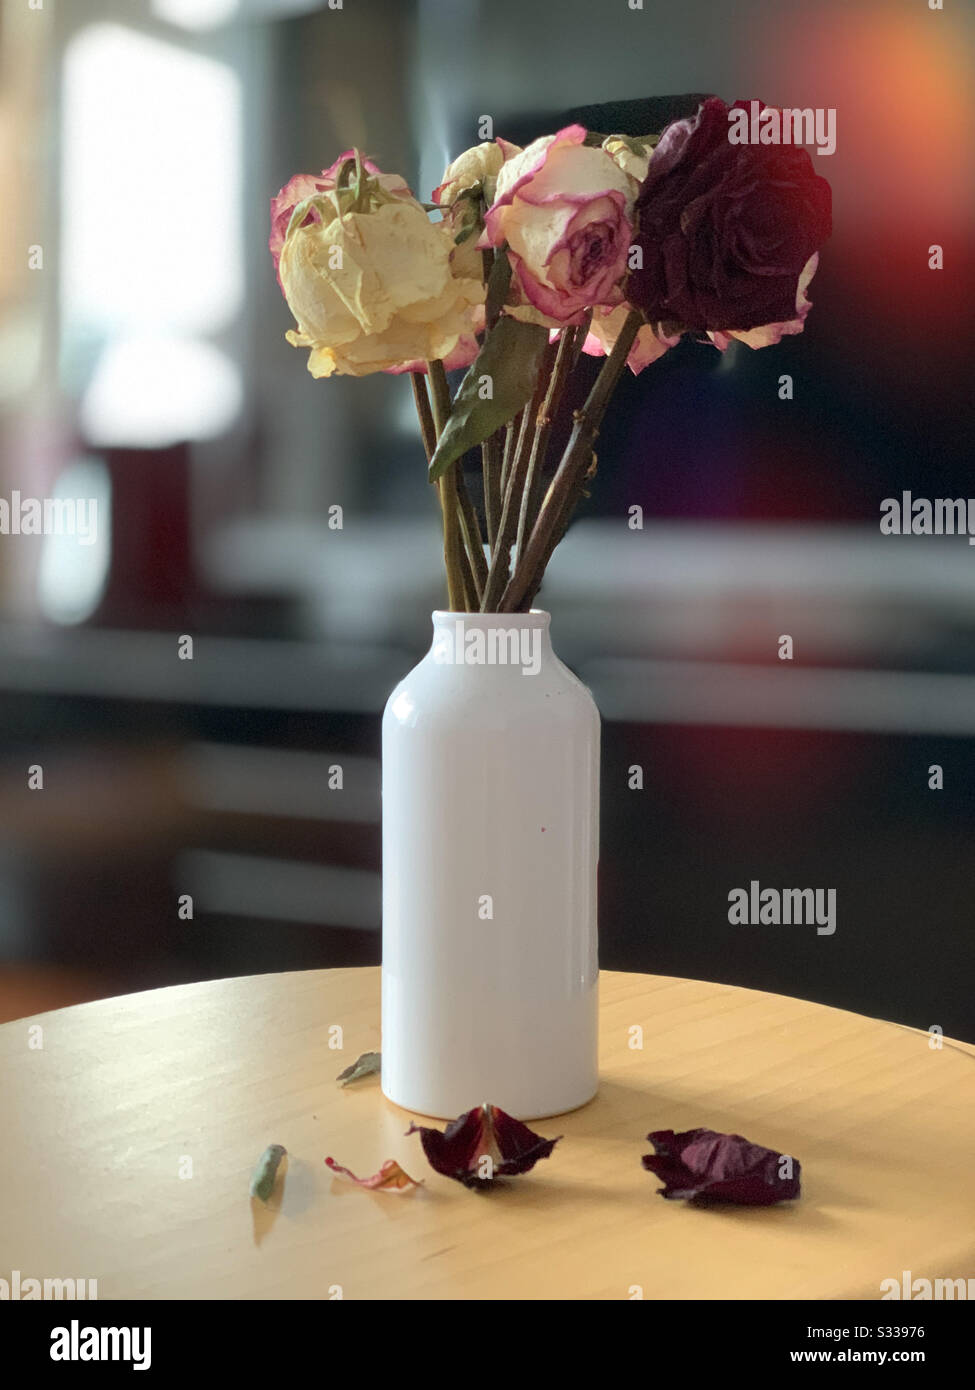 Dead flowers for love or for apologies? Stock Photo